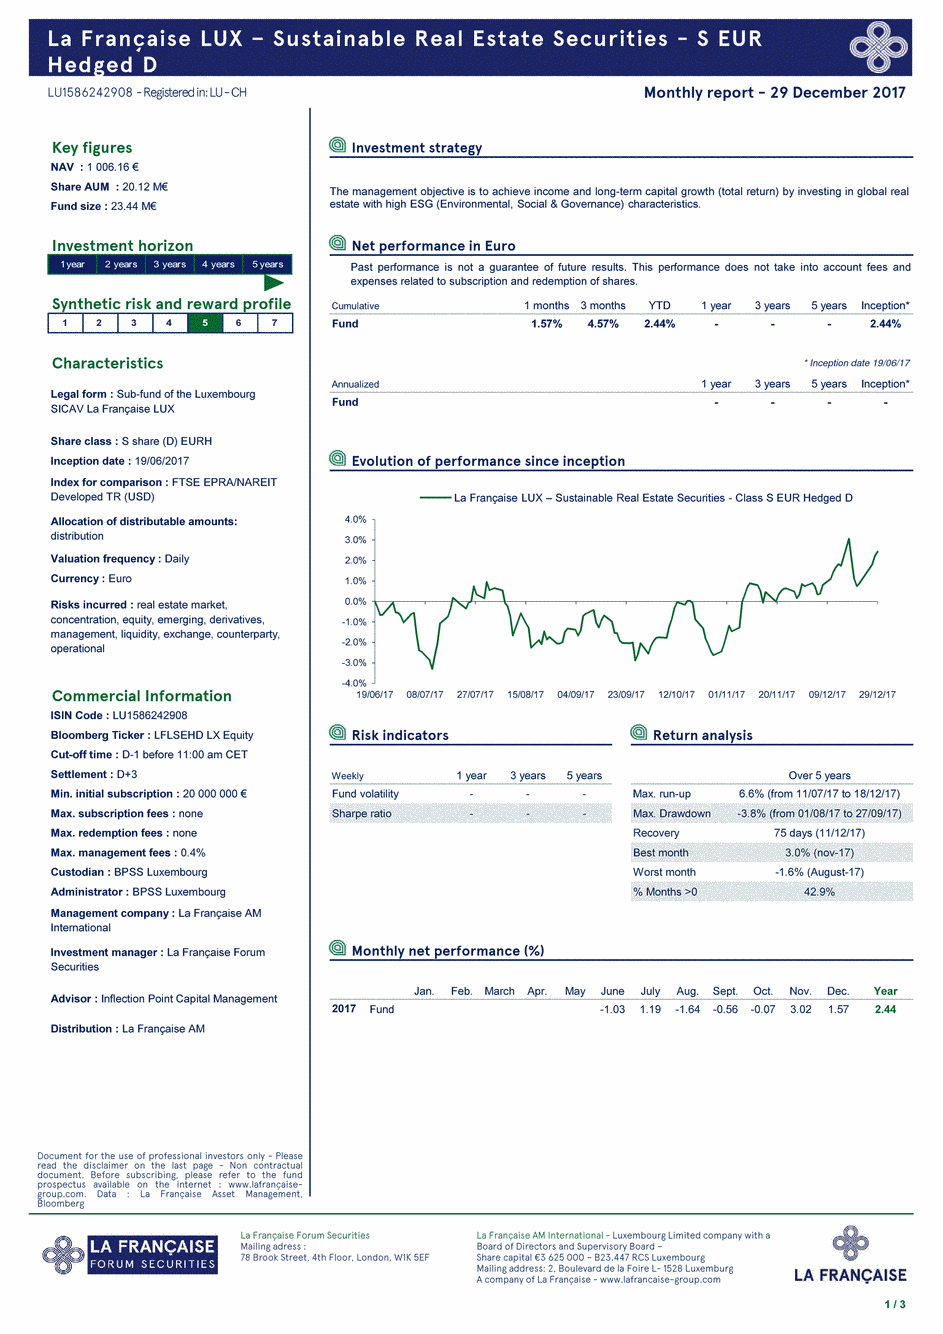 Reporting La Française LUX - Sustainable Real Estate Securities - Class S EUR Hedged D - 31/12/2017 - Anglais